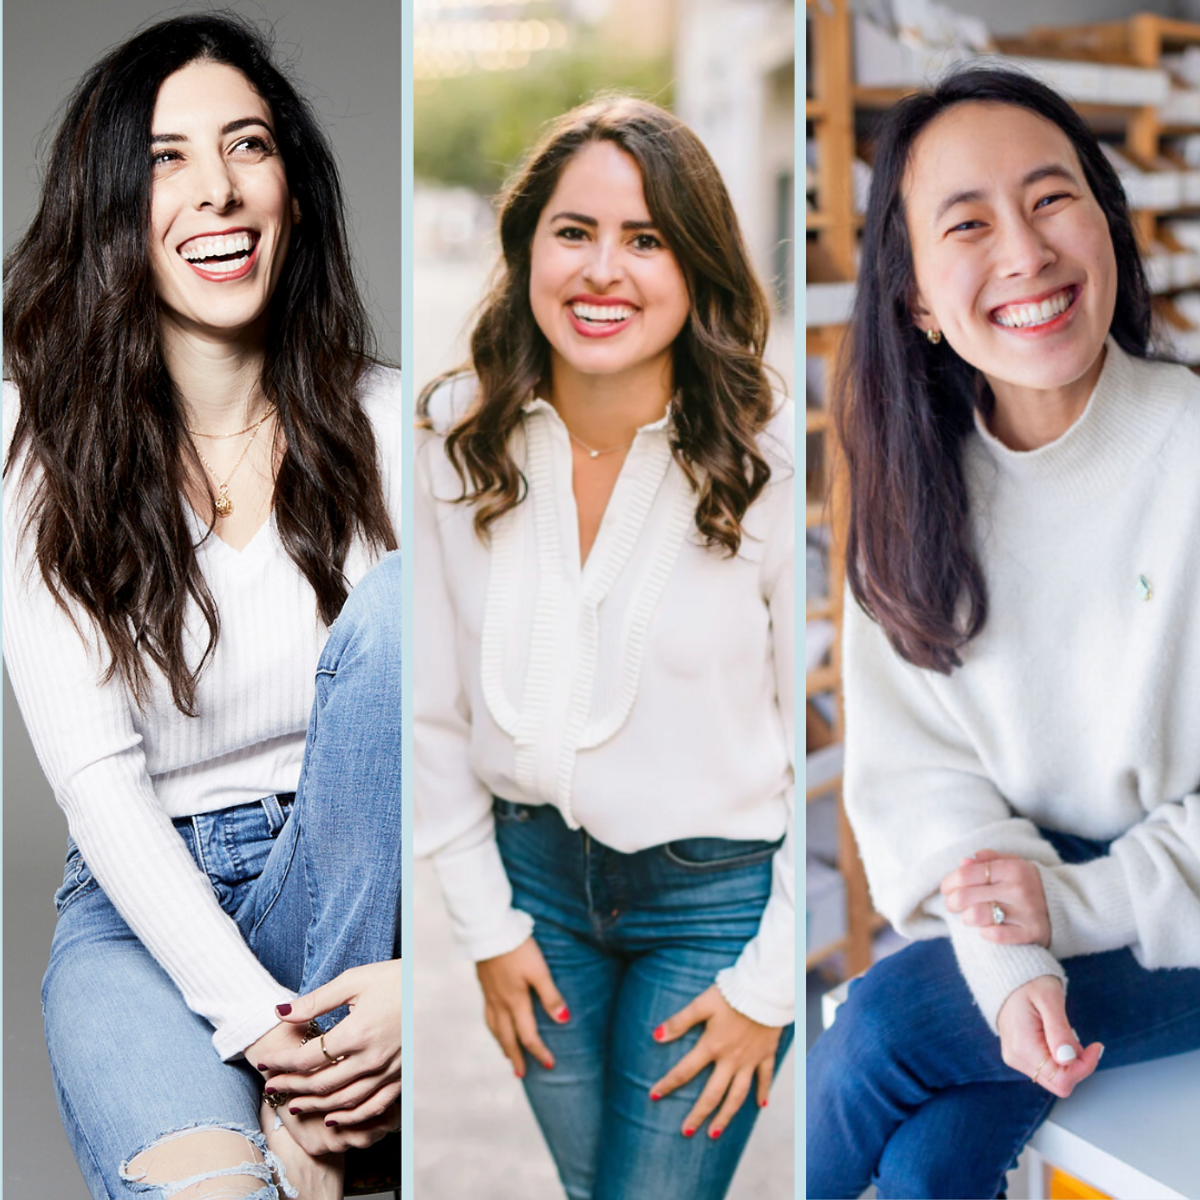 Selfmade by Brit + Co launches cohorts for women founders led by Alexa Carlin, Emily Merrell, and and Kirstie Wang